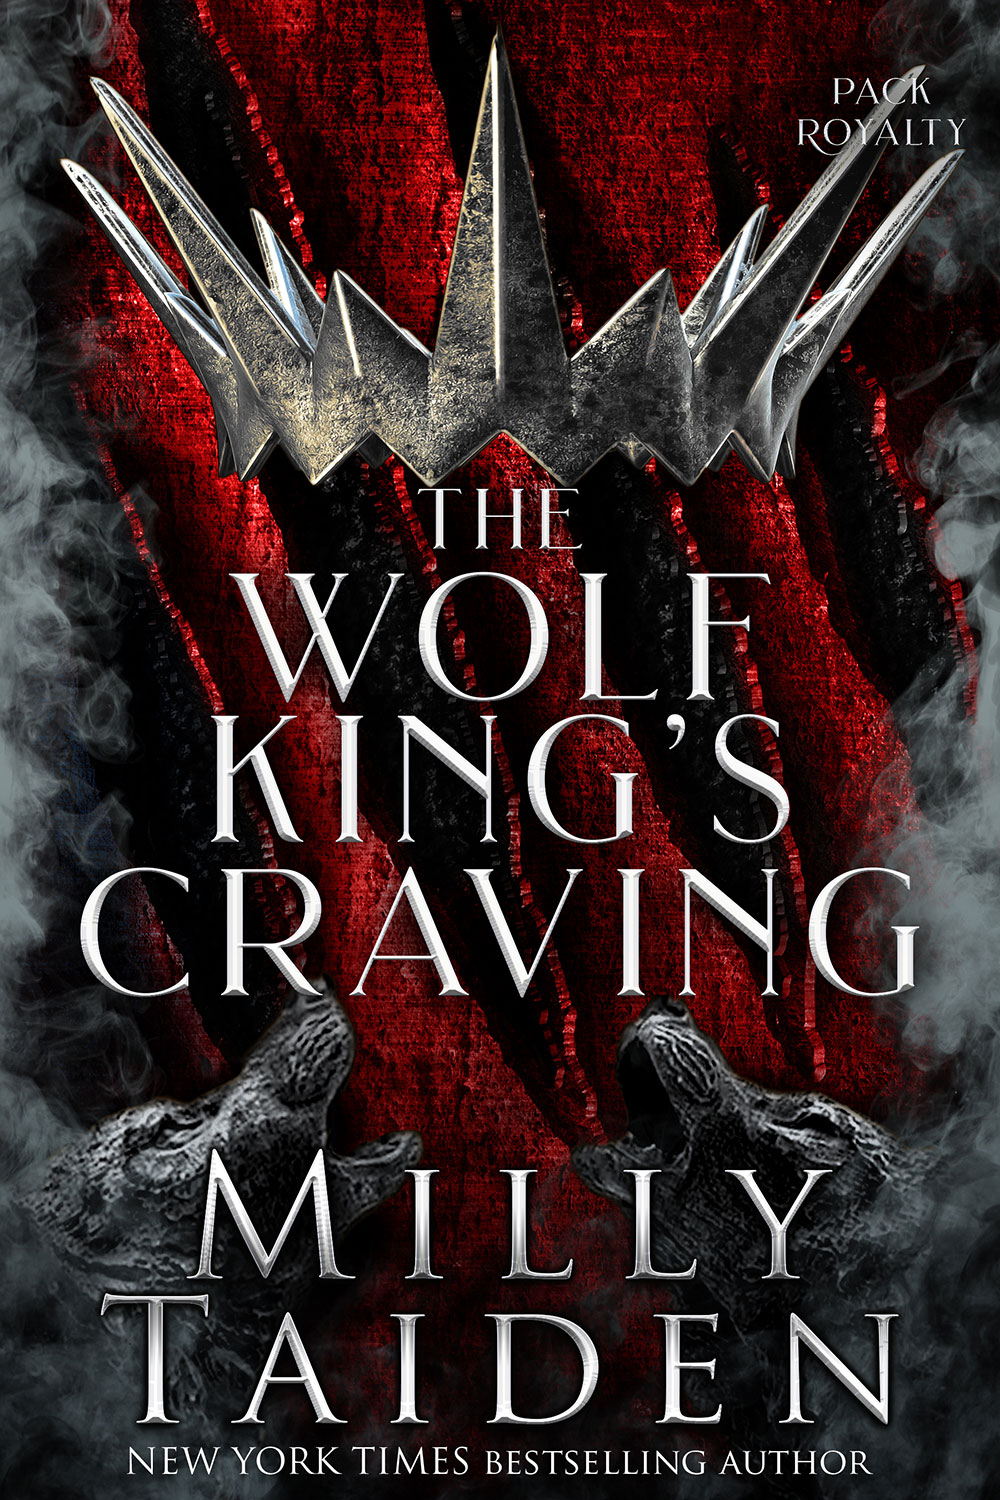 The Wolf King's Craving